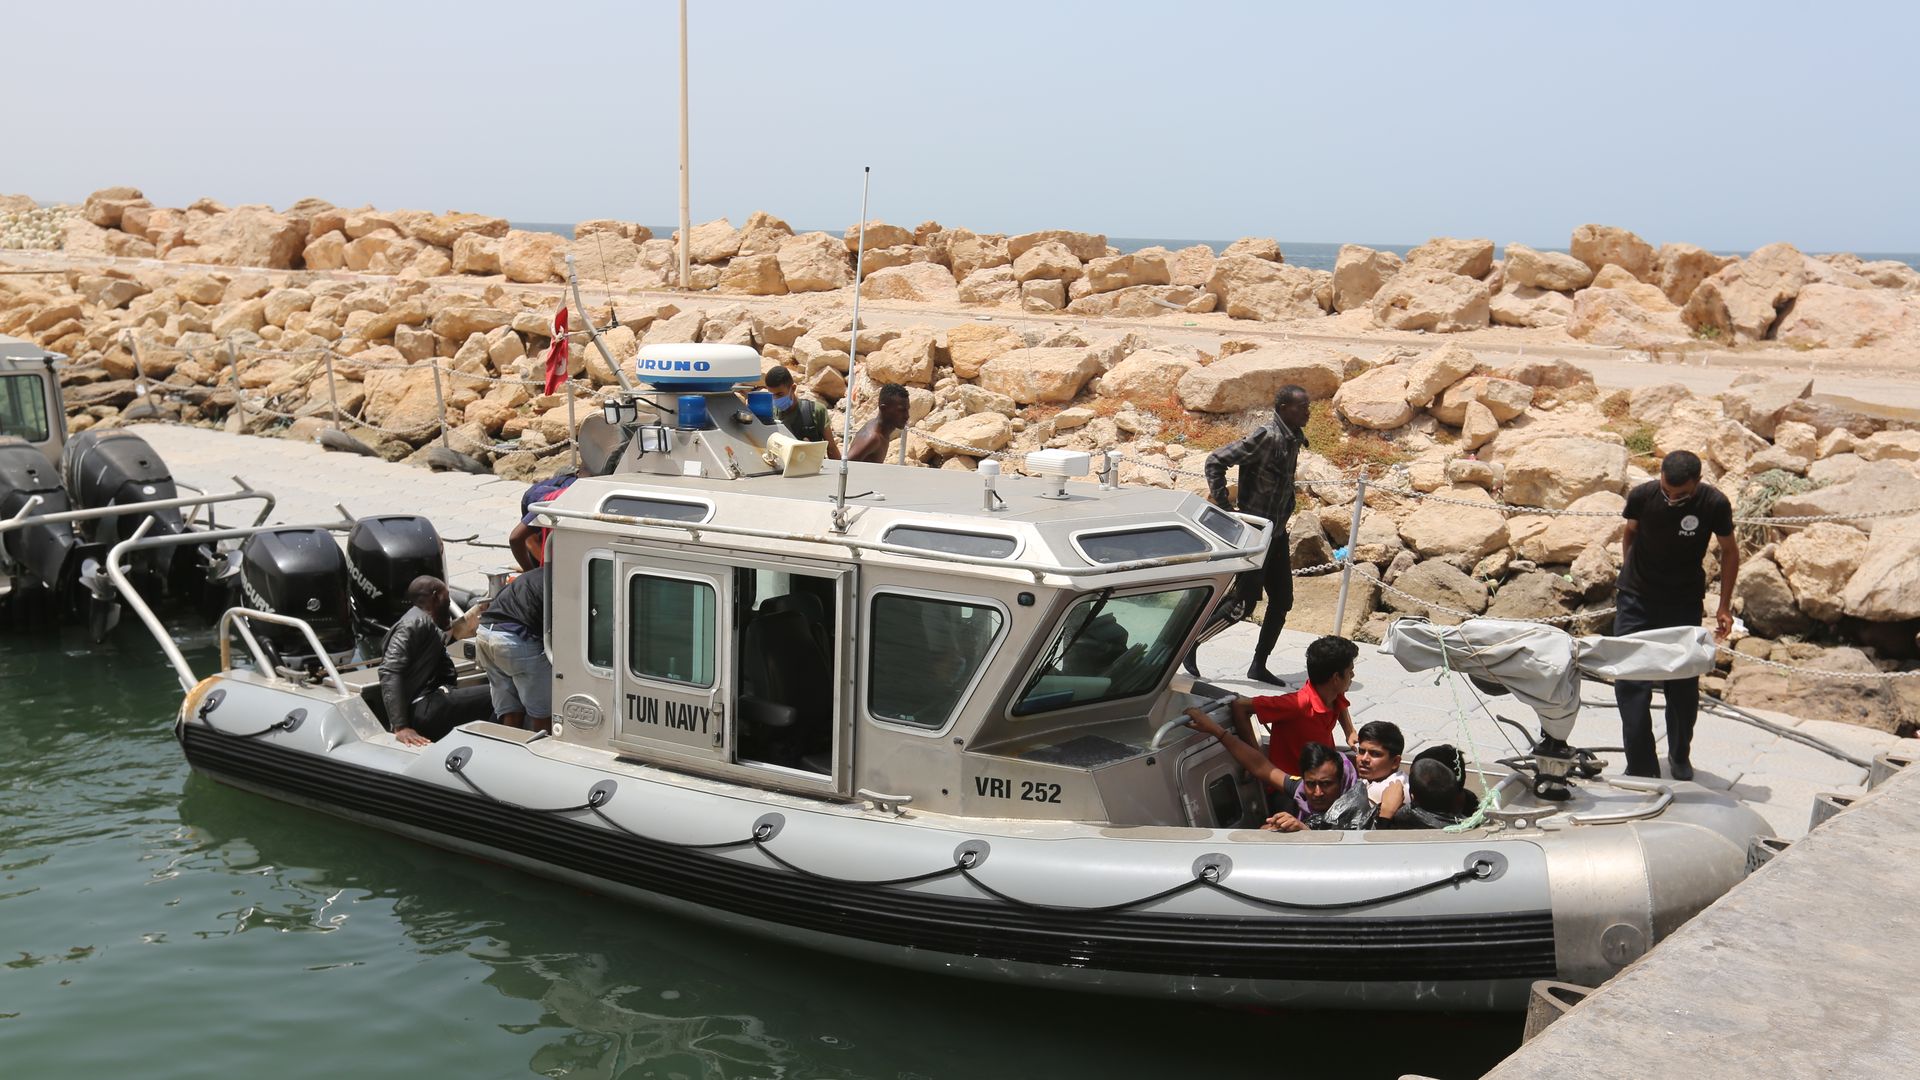 Tunisian naval forces rescue 178 migrants from the Mediterranean after the boats transporting them broke down while trying to reach Europe, in Tunisia on June 27, 2021. 